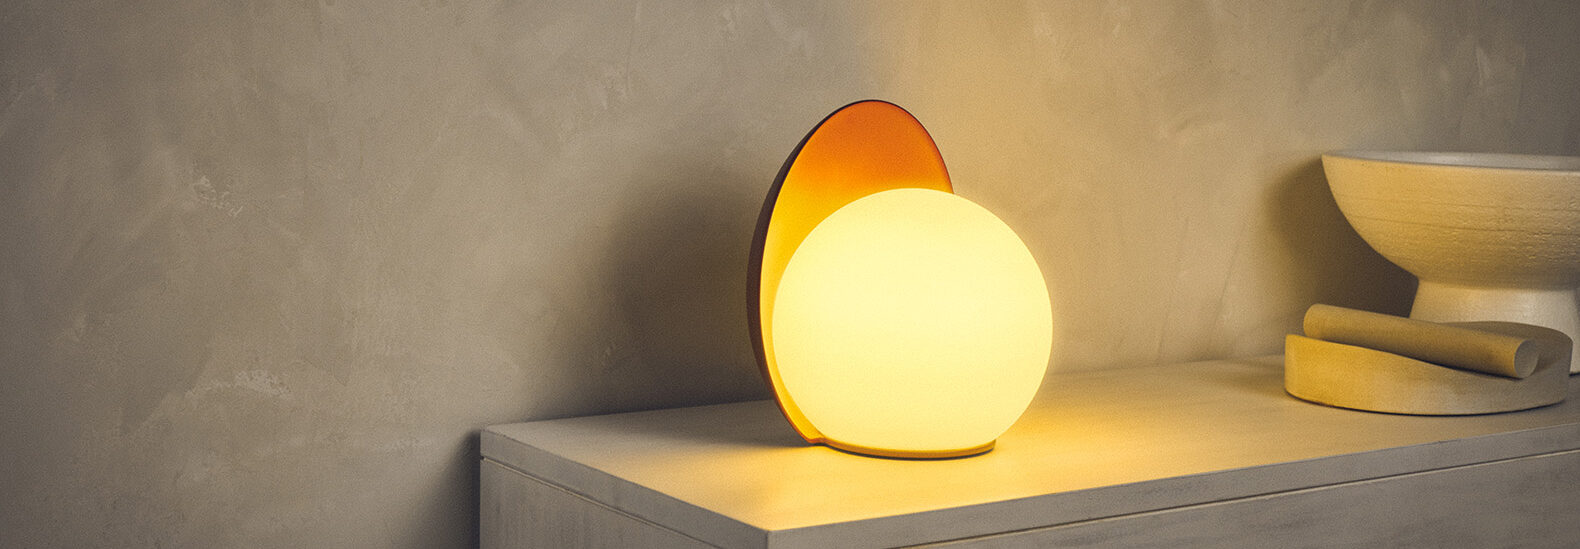 These light fixtures are 3D printed and biodegradable